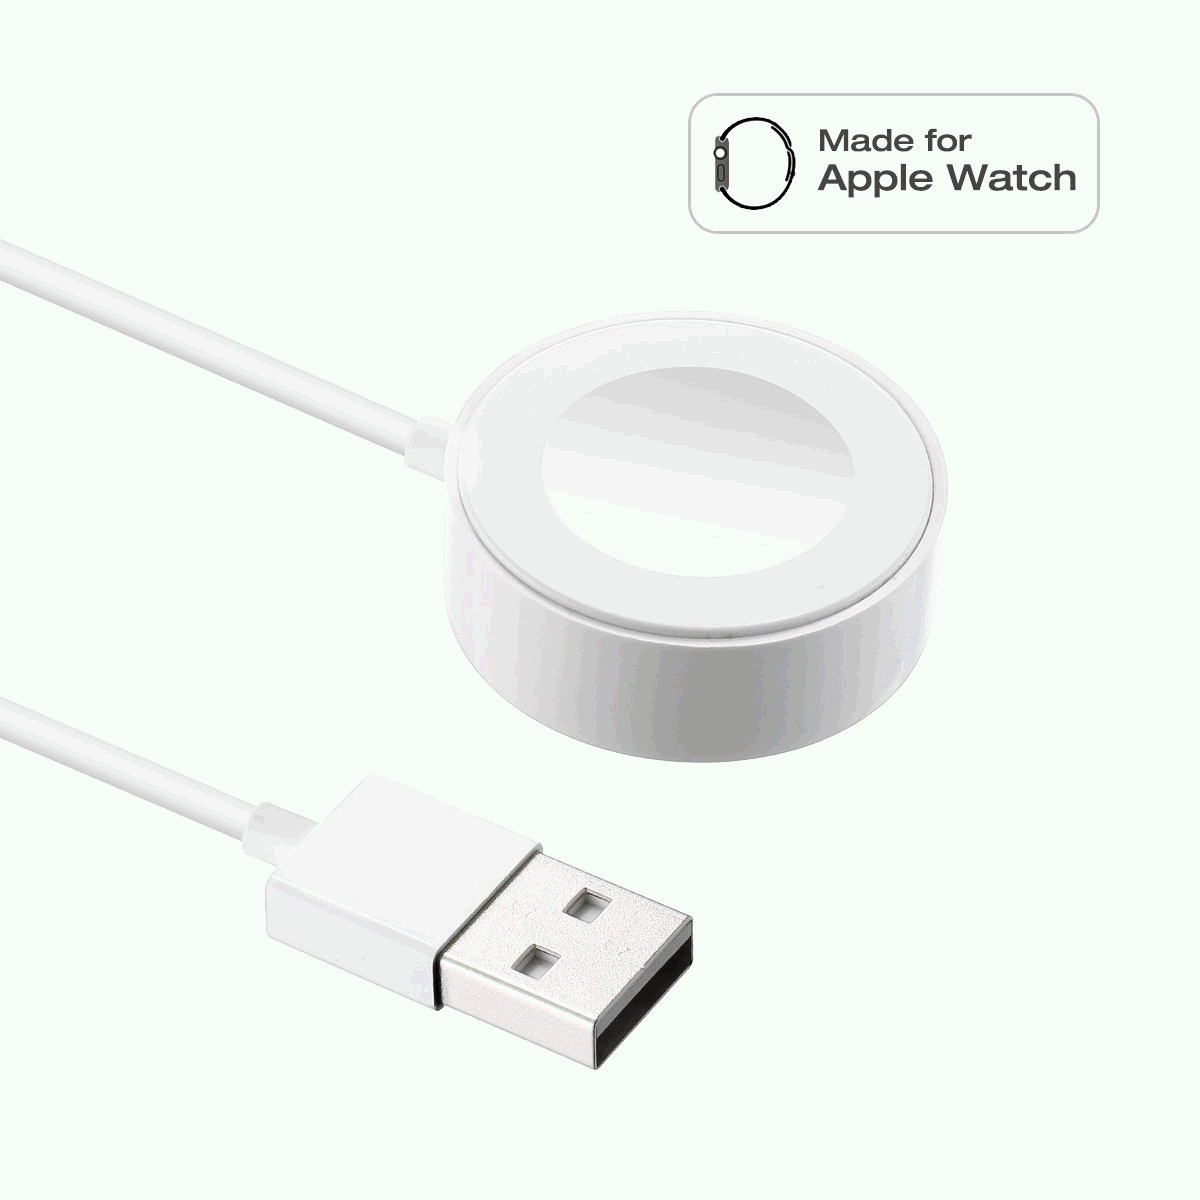 Watch Charger for Apple Watch Charger, 0.3m/1FT Short iWatch USB Wireless  Magnetic Portable Charging Cable Cord Compatible with Apple Watch Series